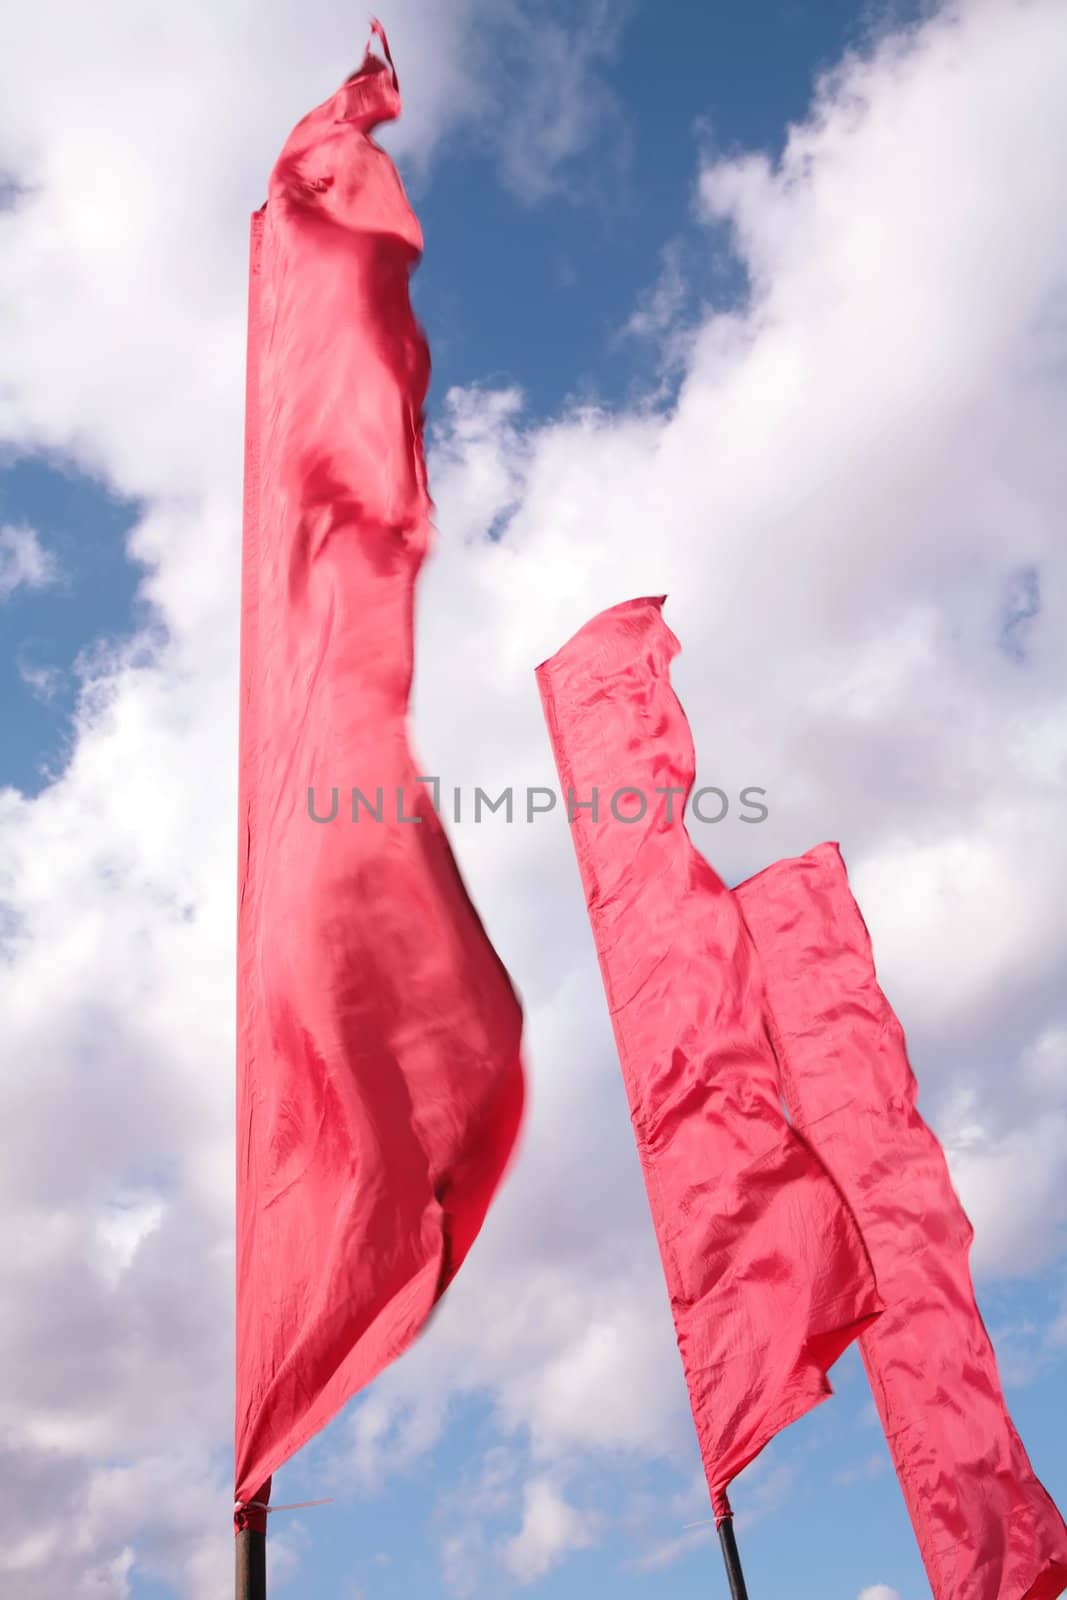 three red banners on winds on background blue sky with white clouds